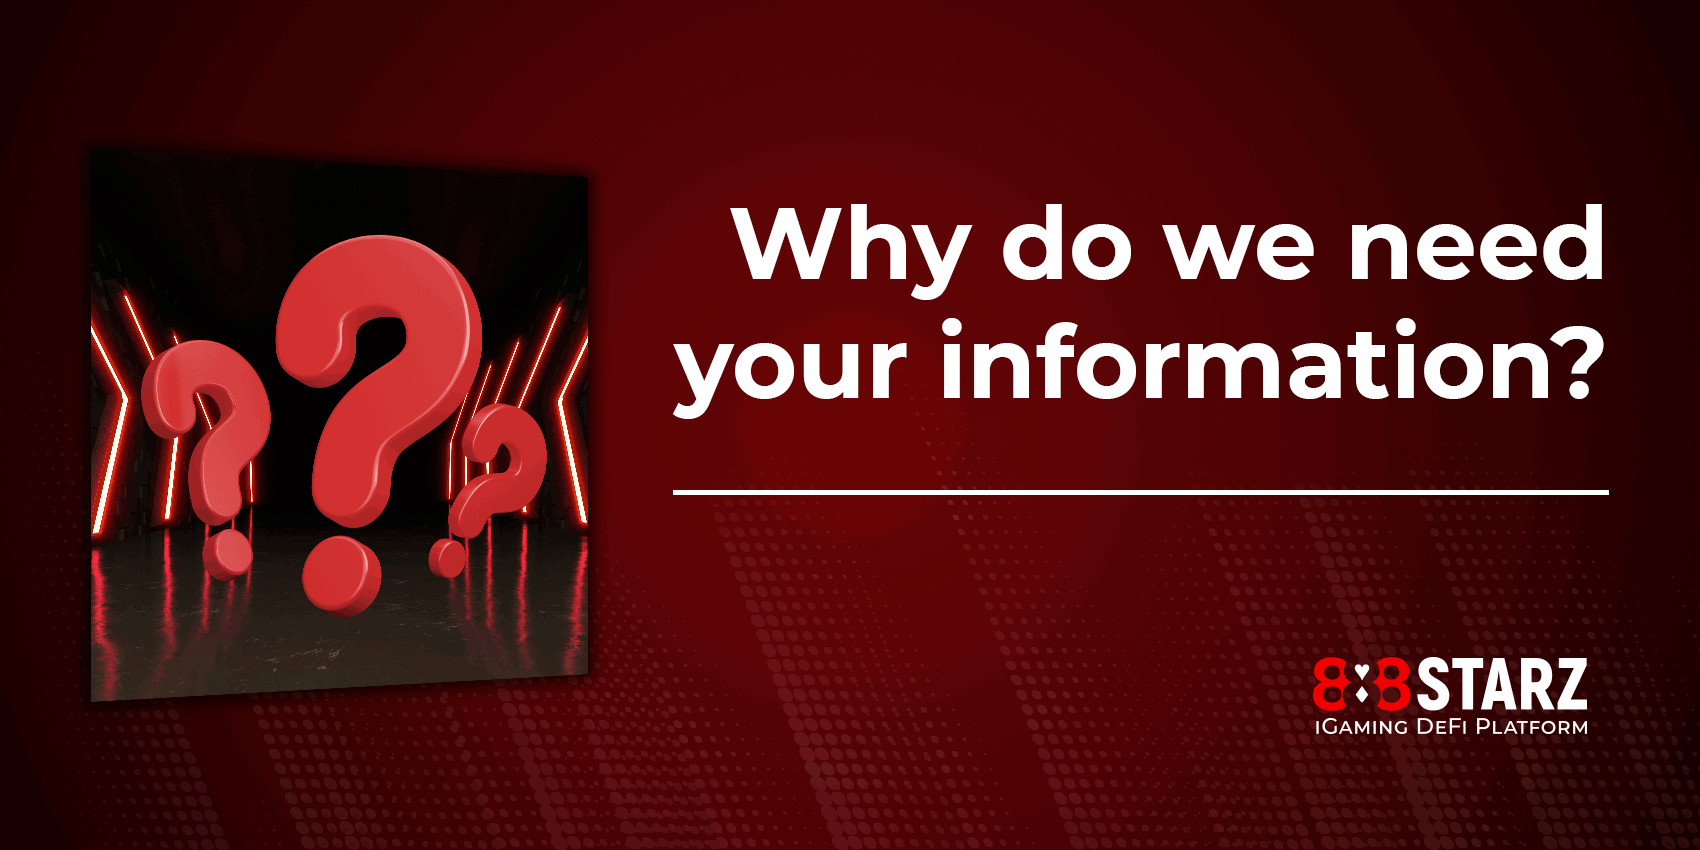 Why do we need your information?